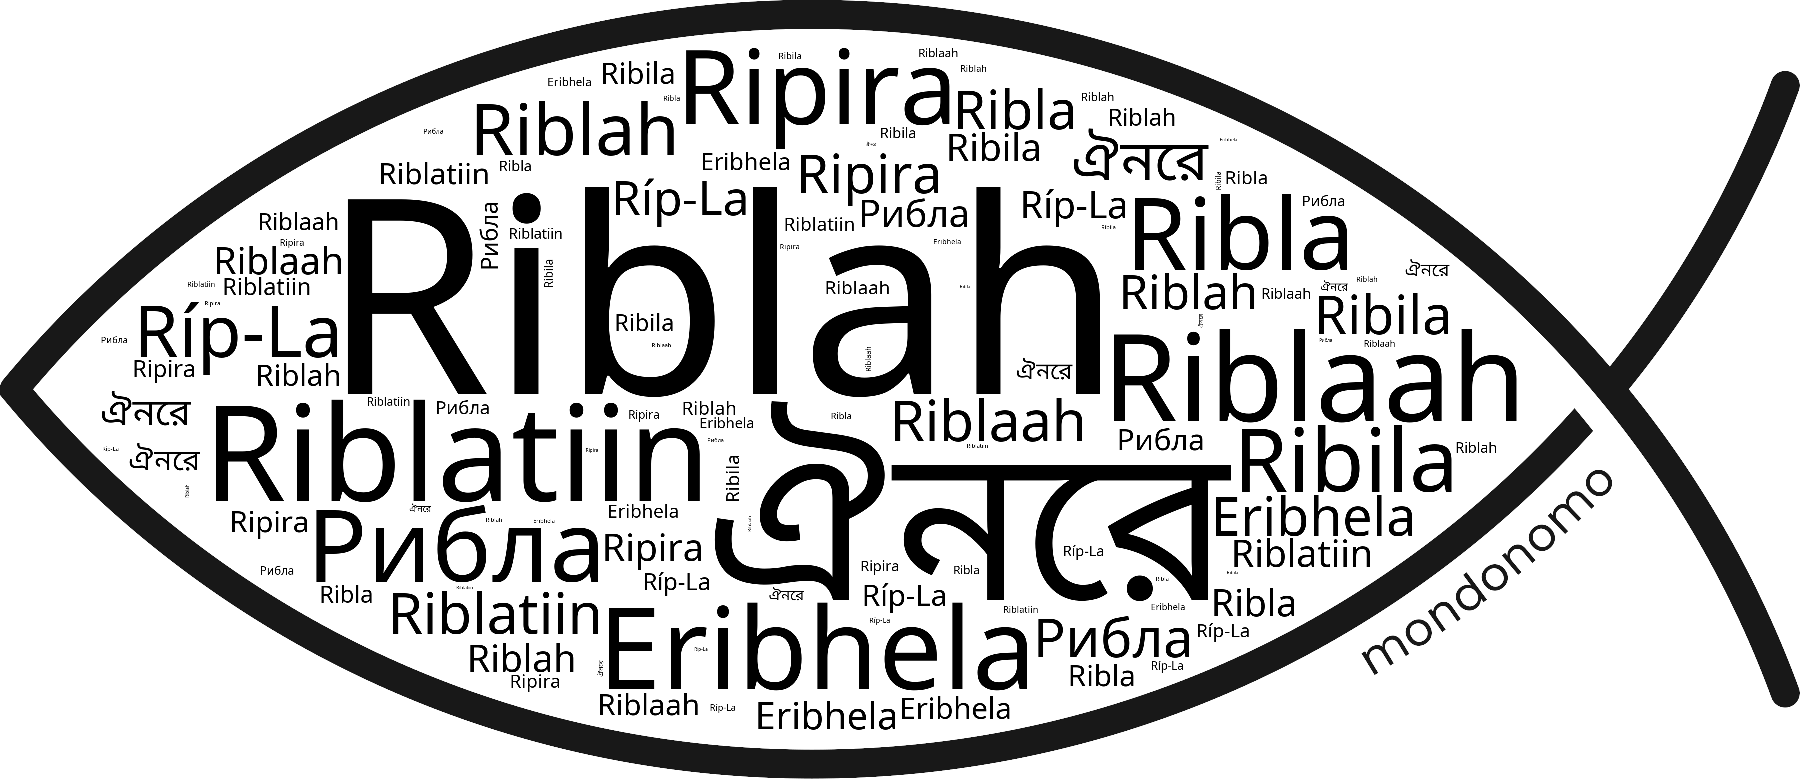 Name Riblah in the world's Bibles